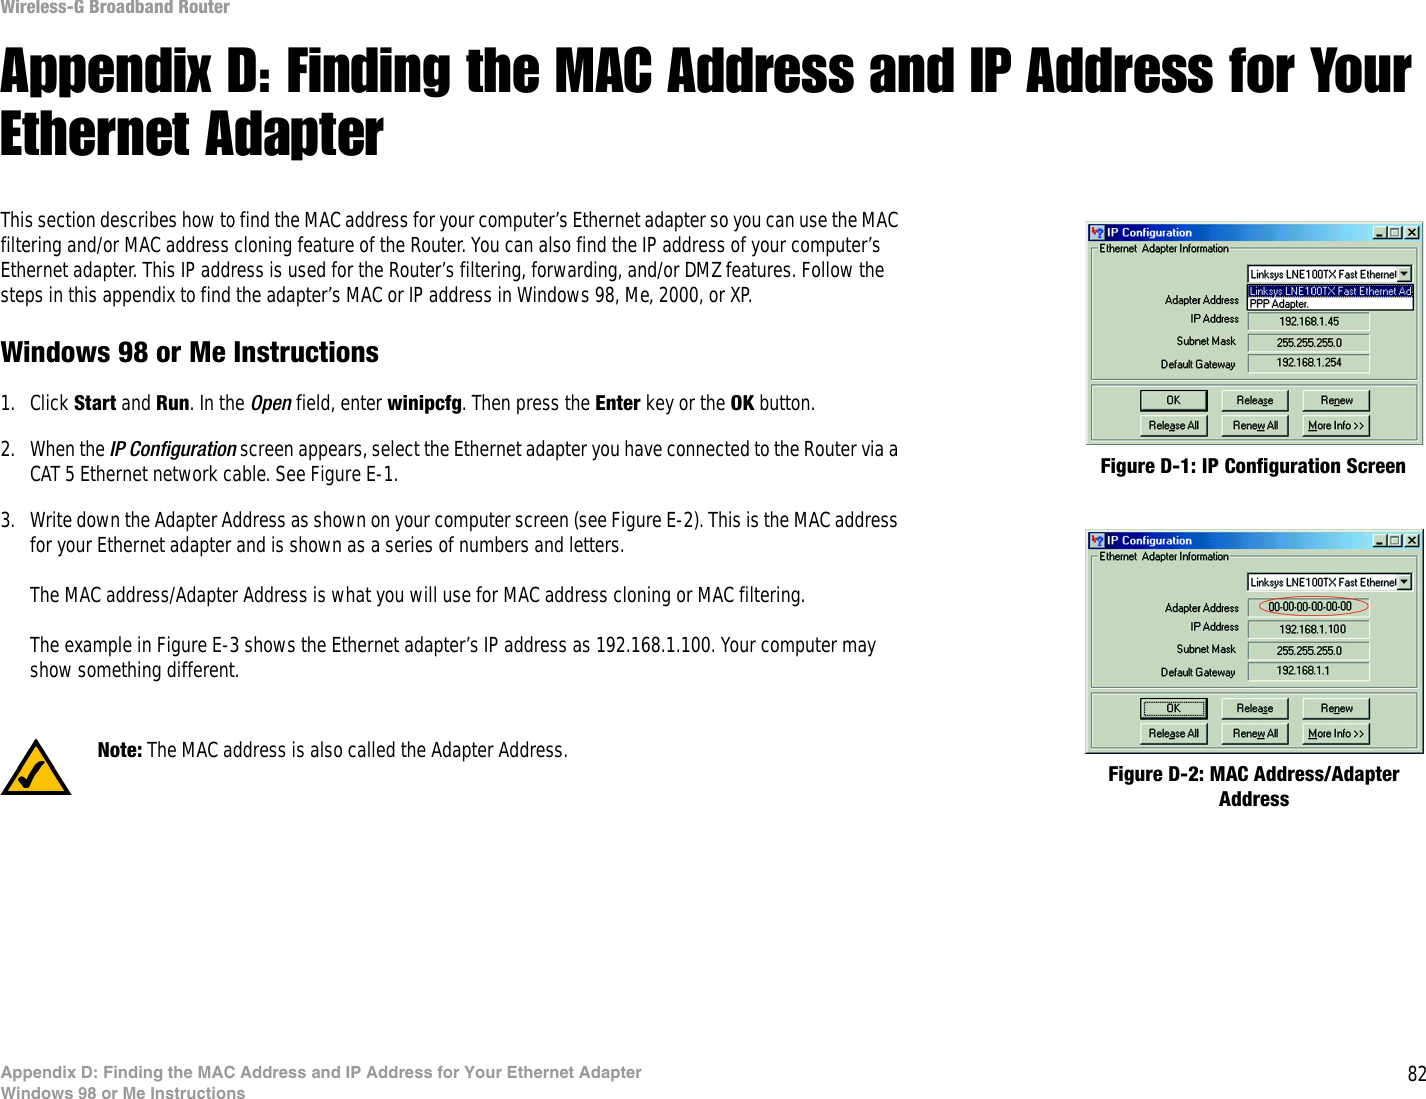 82Appendix D: Finding the MAC Address and IP Address for Your Ethernet AdapterWindows 98 or Me InstructionsWireless-G Broadband RouterAppendix D: Finding the MAC Address and IP Address for Your Ethernet AdapterThis section describes how to find the MAC address for your computer’s Ethernet adapter so you can use the MAC filtering and/or MAC address cloning feature of the Router. You can also find the IP address of your computer’s Ethernet adapter. This IP address is used for the Router’s filtering, forwarding, and/or DMZ features. Follow the steps in this appendix to find the adapter’s MAC or IP address in Windows 98, Me, 2000, or XP.Windows 98 or Me Instructions1. Click Start and Run. In the Open field, enter winipcfg. Then press the Enter key or the OK button. 2. When the IP Configuration screen appears, select the Ethernet adapter you have connected to the Router via a CAT 5 Ethernet network cable. See Figure E-1.3. Write down the Adapter Address as shown on your computer screen (see Figure E-2). This is the MAC address for your Ethernet adapter and is shown as a series of numbers and letters.The MAC address/Adapter Address is what you will use for MAC address cloning or MAC filtering.The example in Figure E-3 shows the Ethernet adapter’s IP address as 192.168.1.100. Your computer may show something different.Figure D-2: MAC Address/Adapter AddressFigure D-1: IP Configuration ScreenNote: The MAC address is also called the Adapter Address.